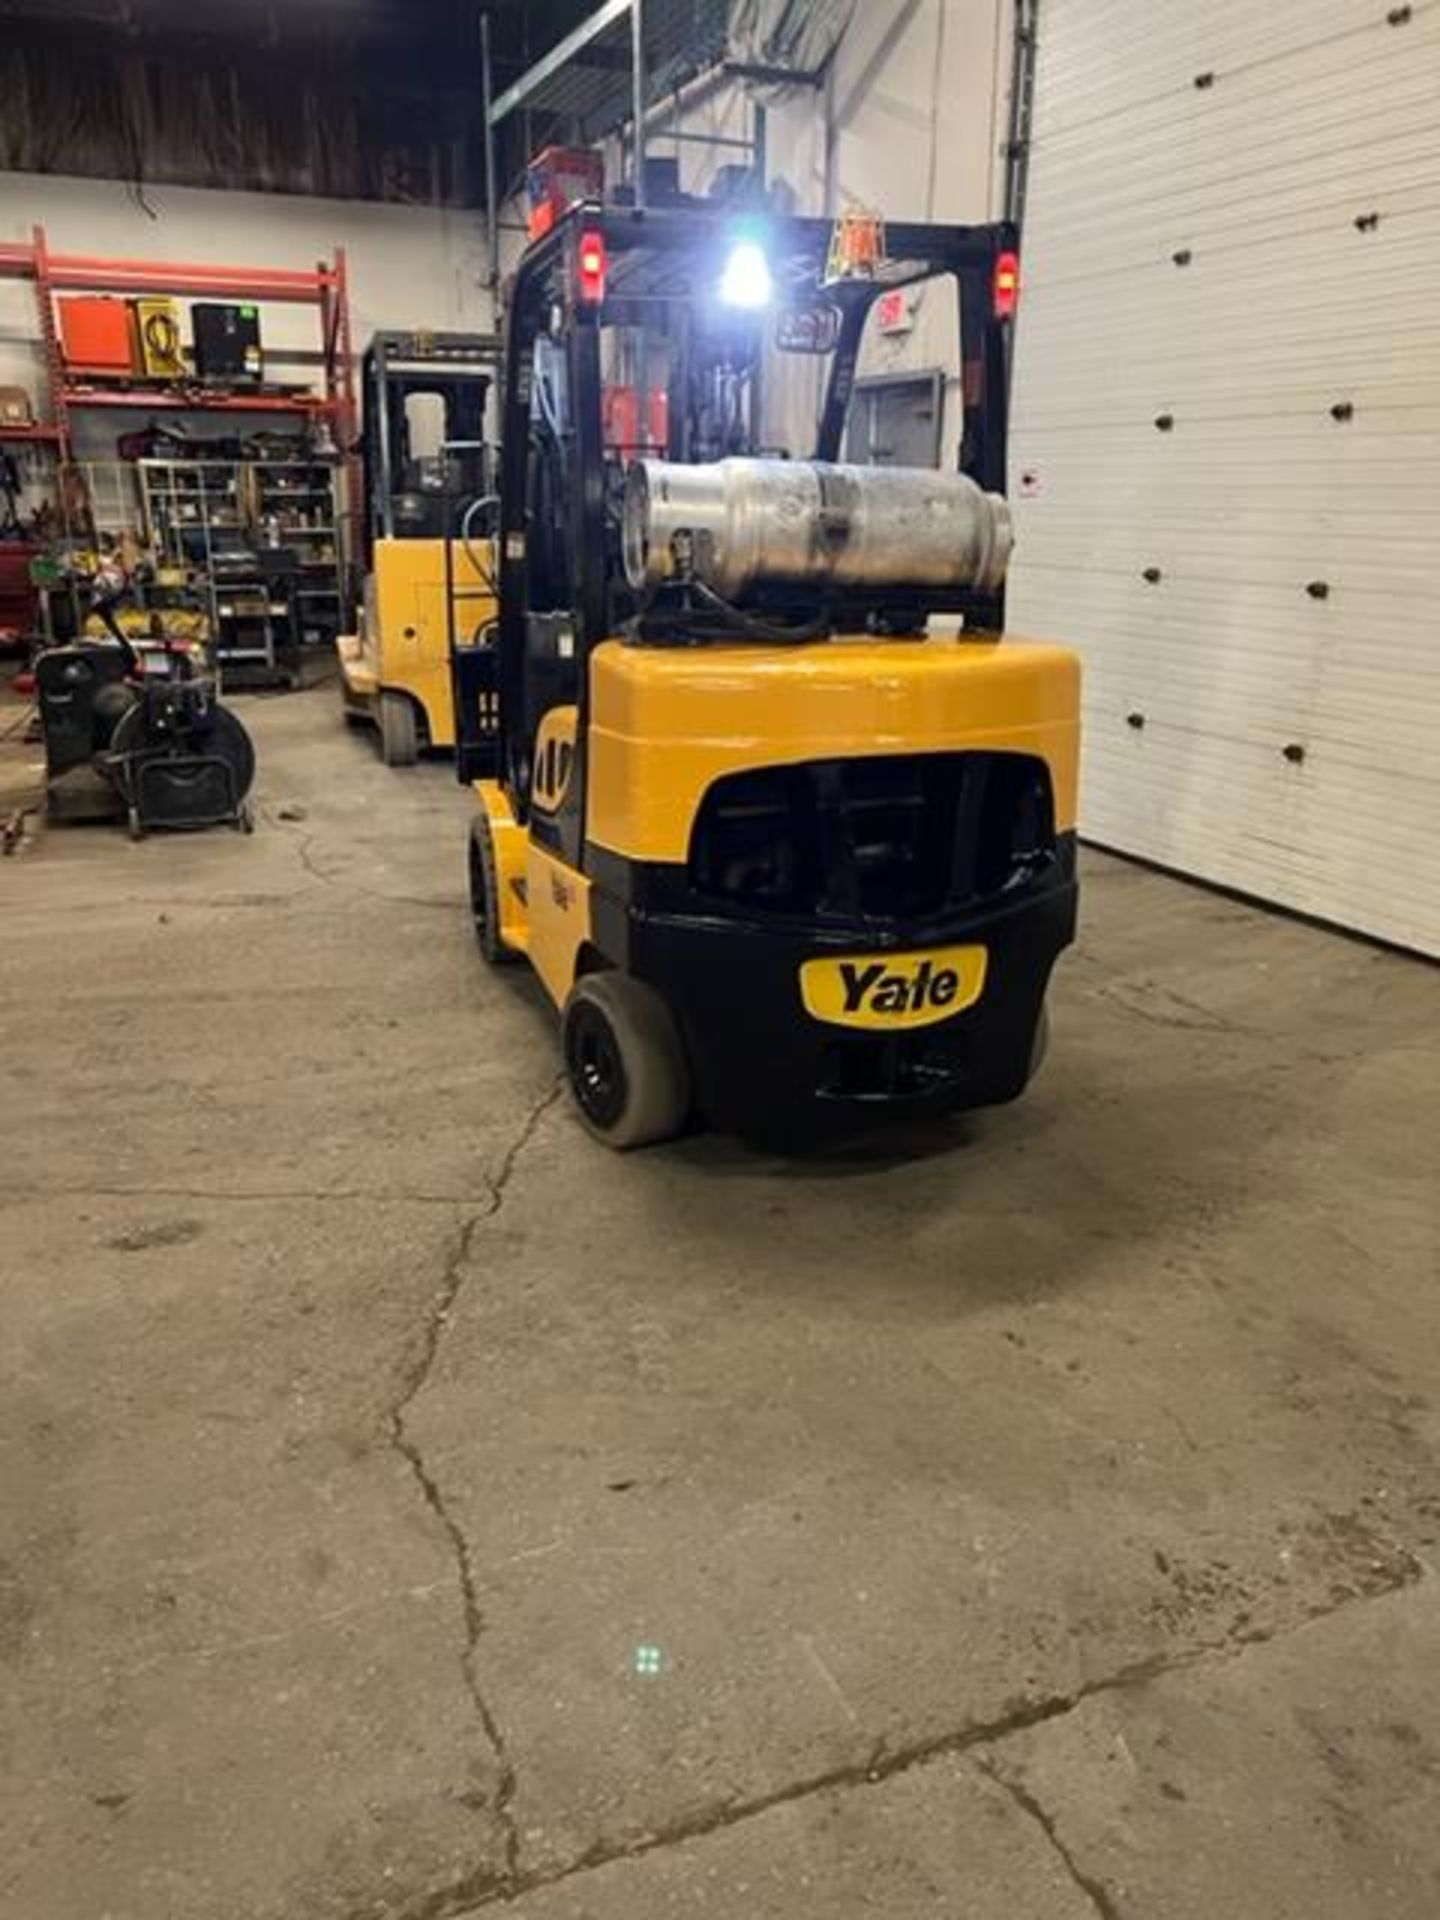 FREE CUSTOMS - NICE 2017 Yale model 80 - 8,000lbs Capacity Forklift LPG (propane) with 54" forks - Image 4 of 4